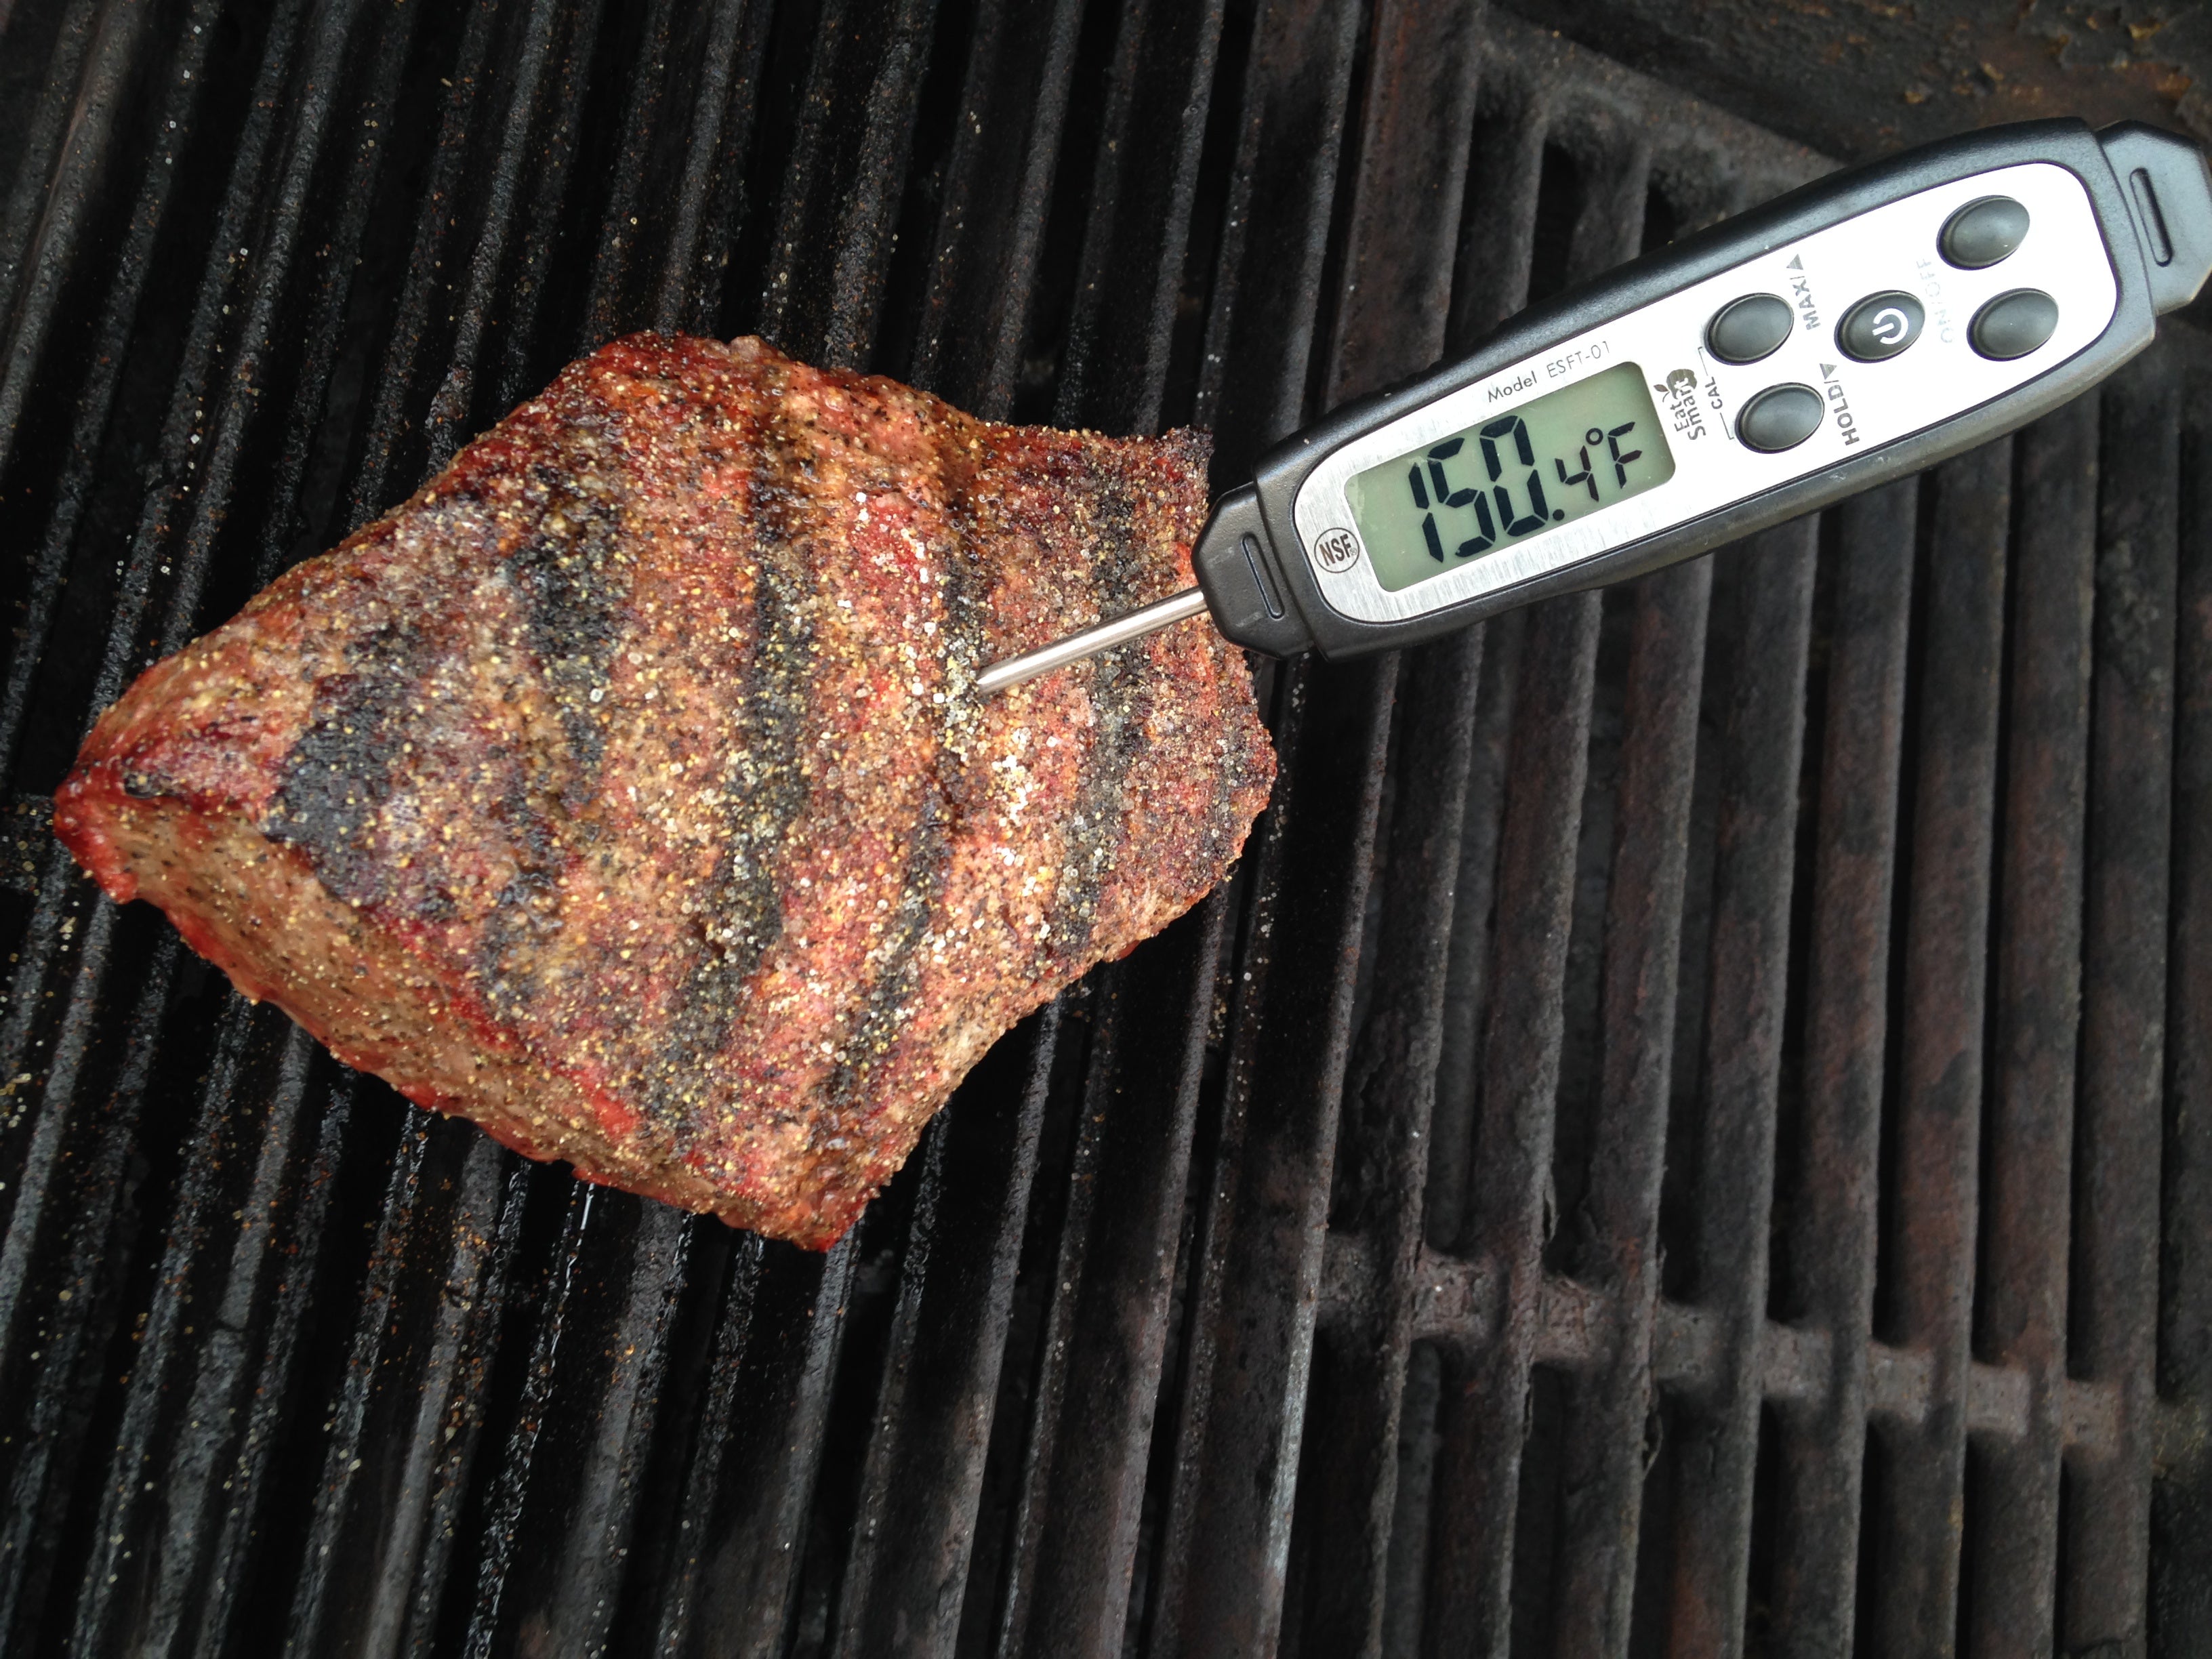 How to use an Instant Read Digital Meat Thermometer Correctly